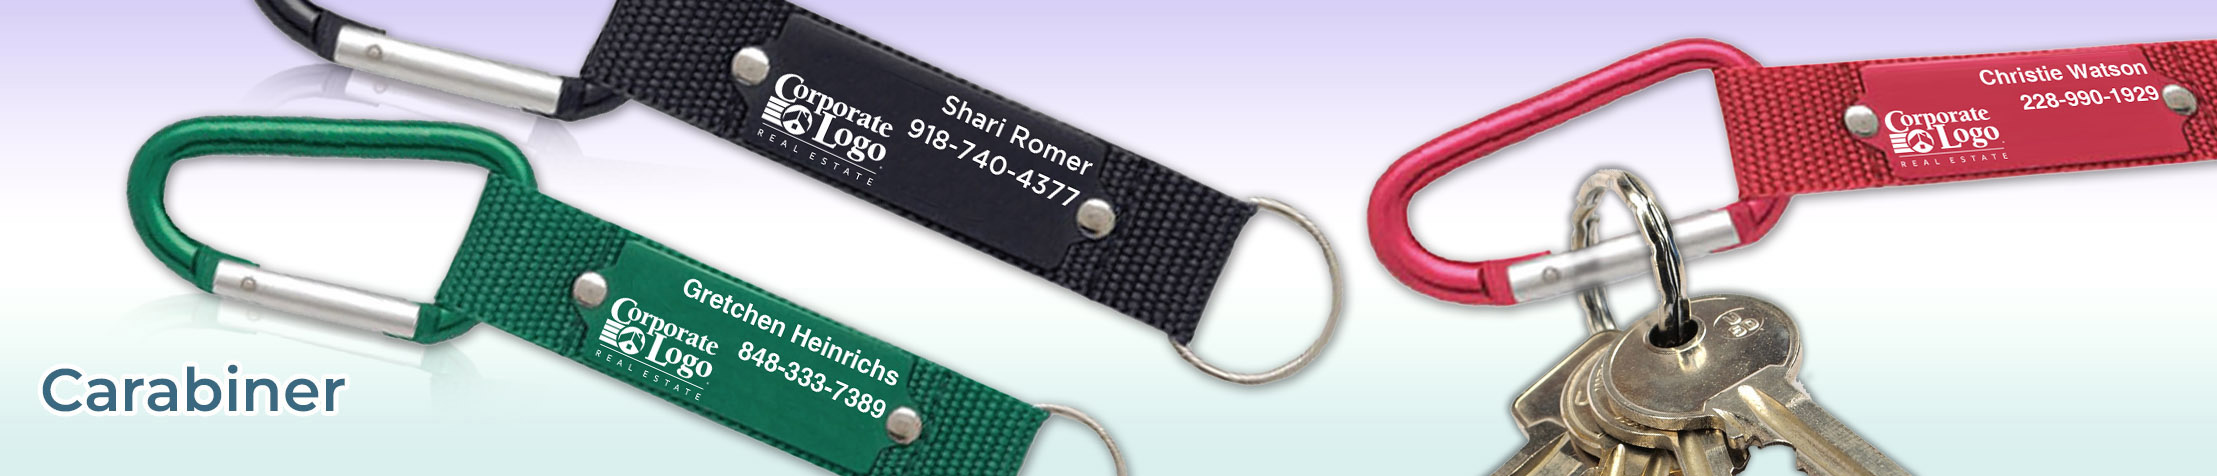 Better Homes and Gardens Real Estate Carabiner - BHGRE personalized realtor promotional products | BestPrintBuy.com